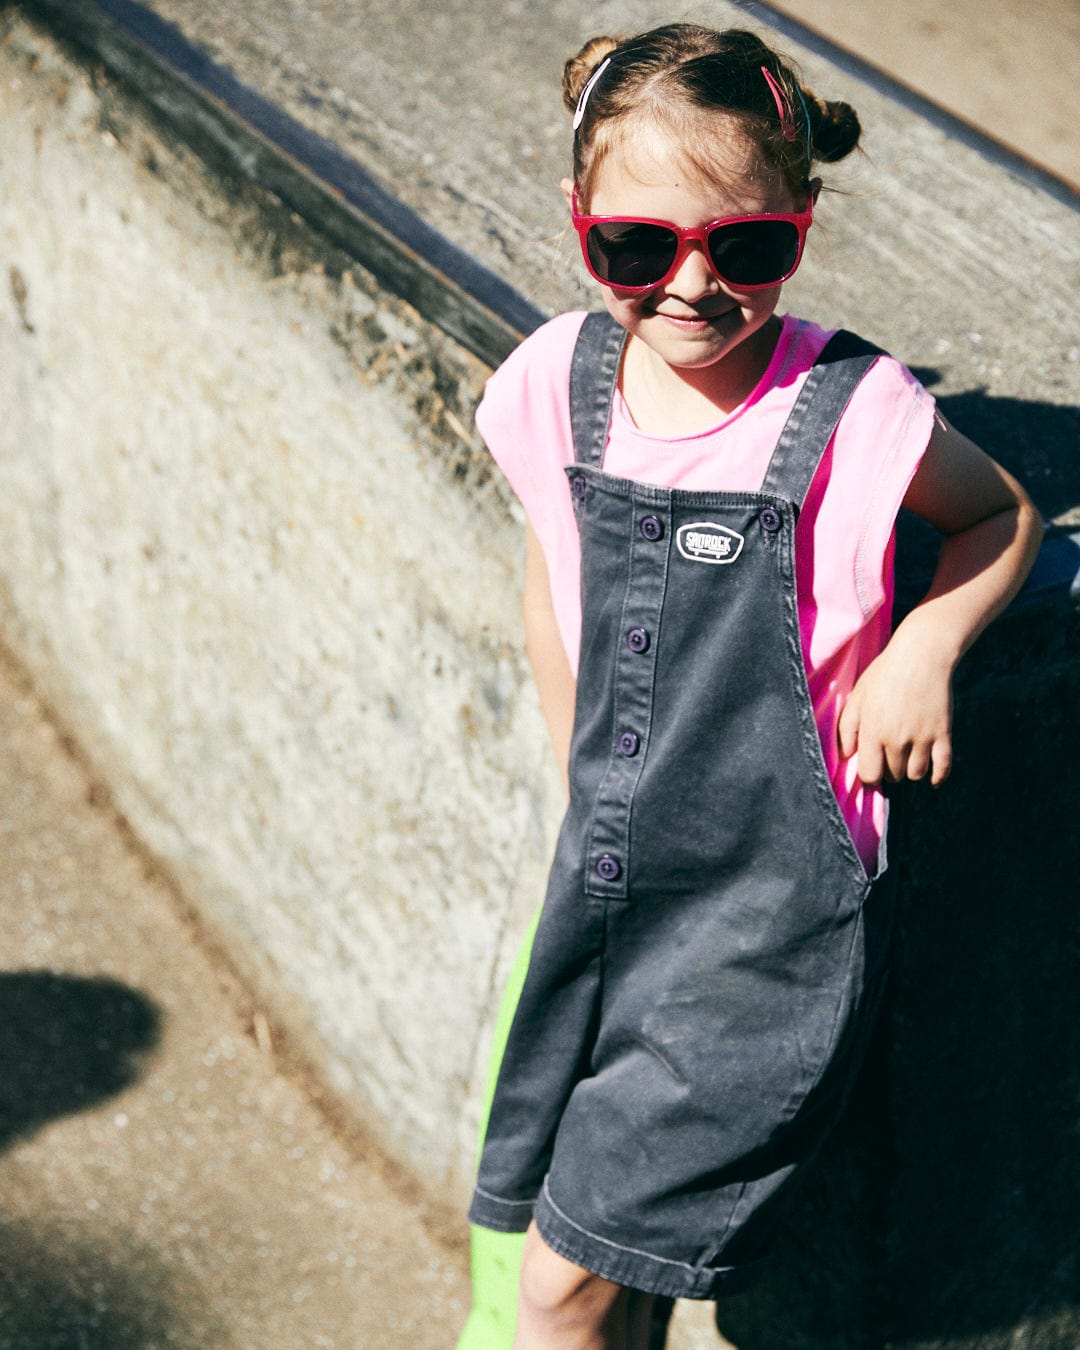 A young child wearing red sunglasses, a Saltrock Mystic Skulls - Recycled Kids Longline Vest - Pink, and denim overalls leans against a concrete wall outdoors, exuding a distressed grunge style.